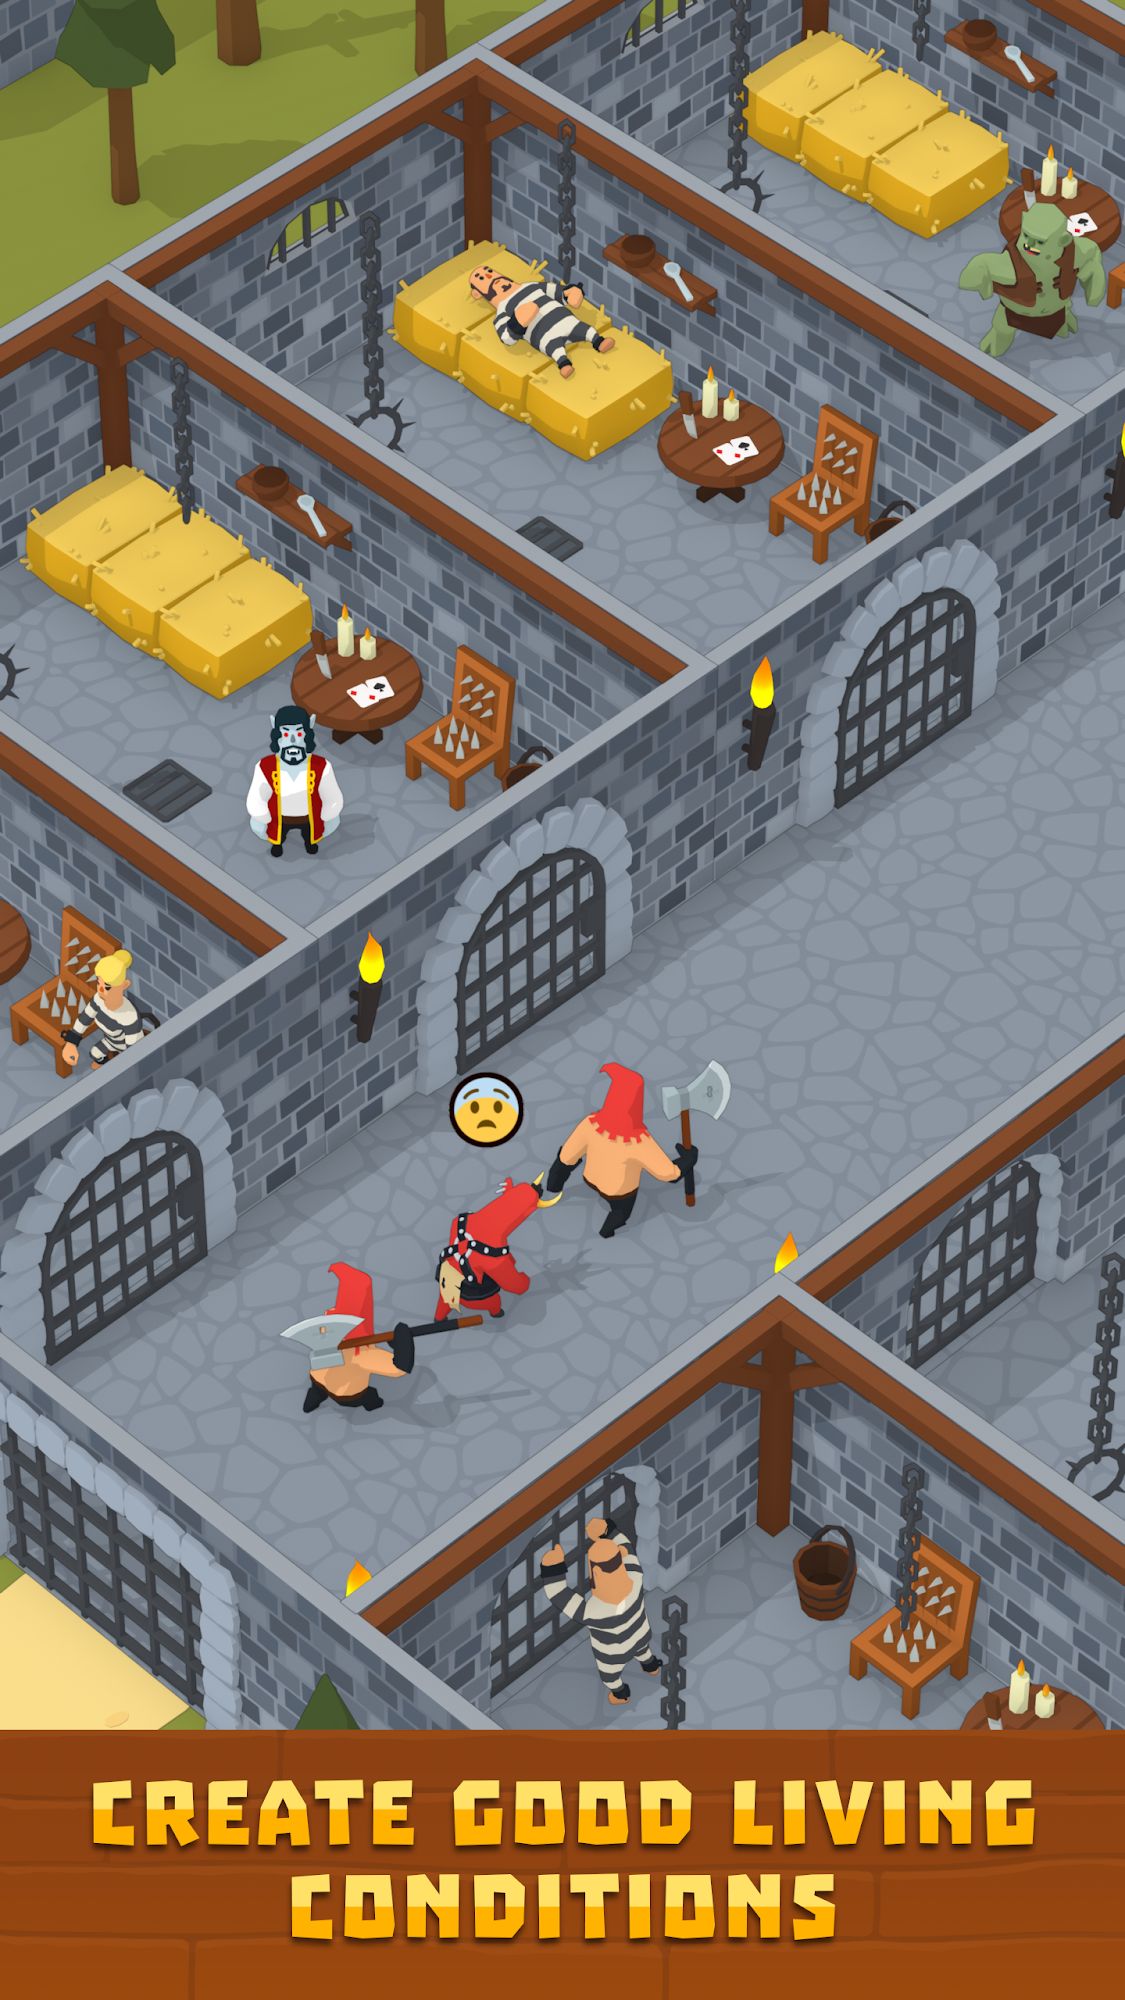 Idle Medieval Prison Tycoon - Android game screenshots.